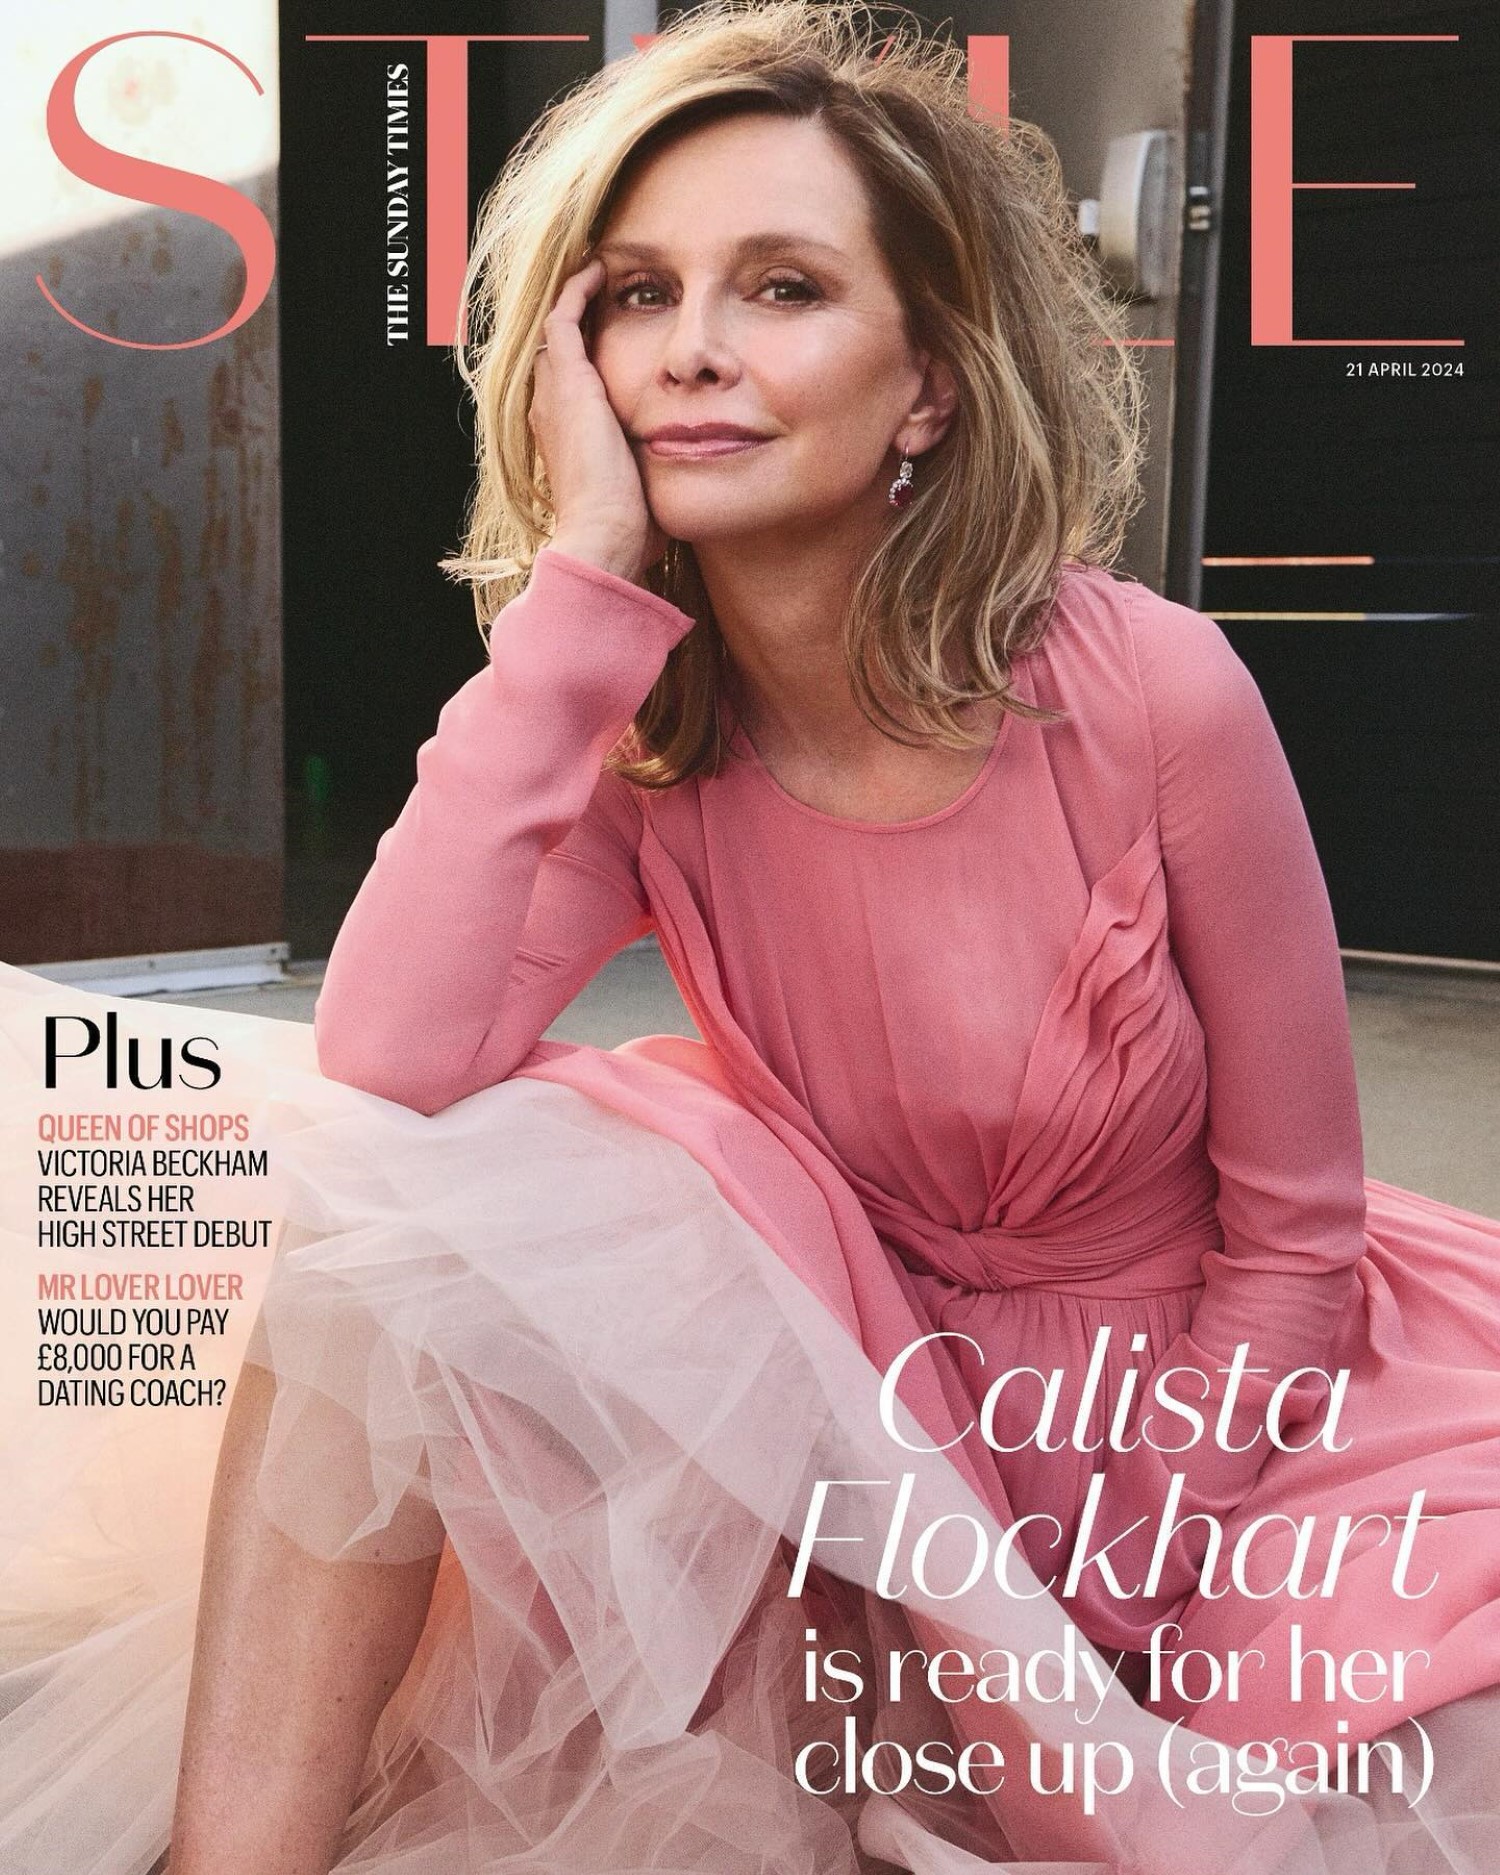 Calista Flockhart covers The Sunday Times Style April 21st, 2024 by Pamela Hanson